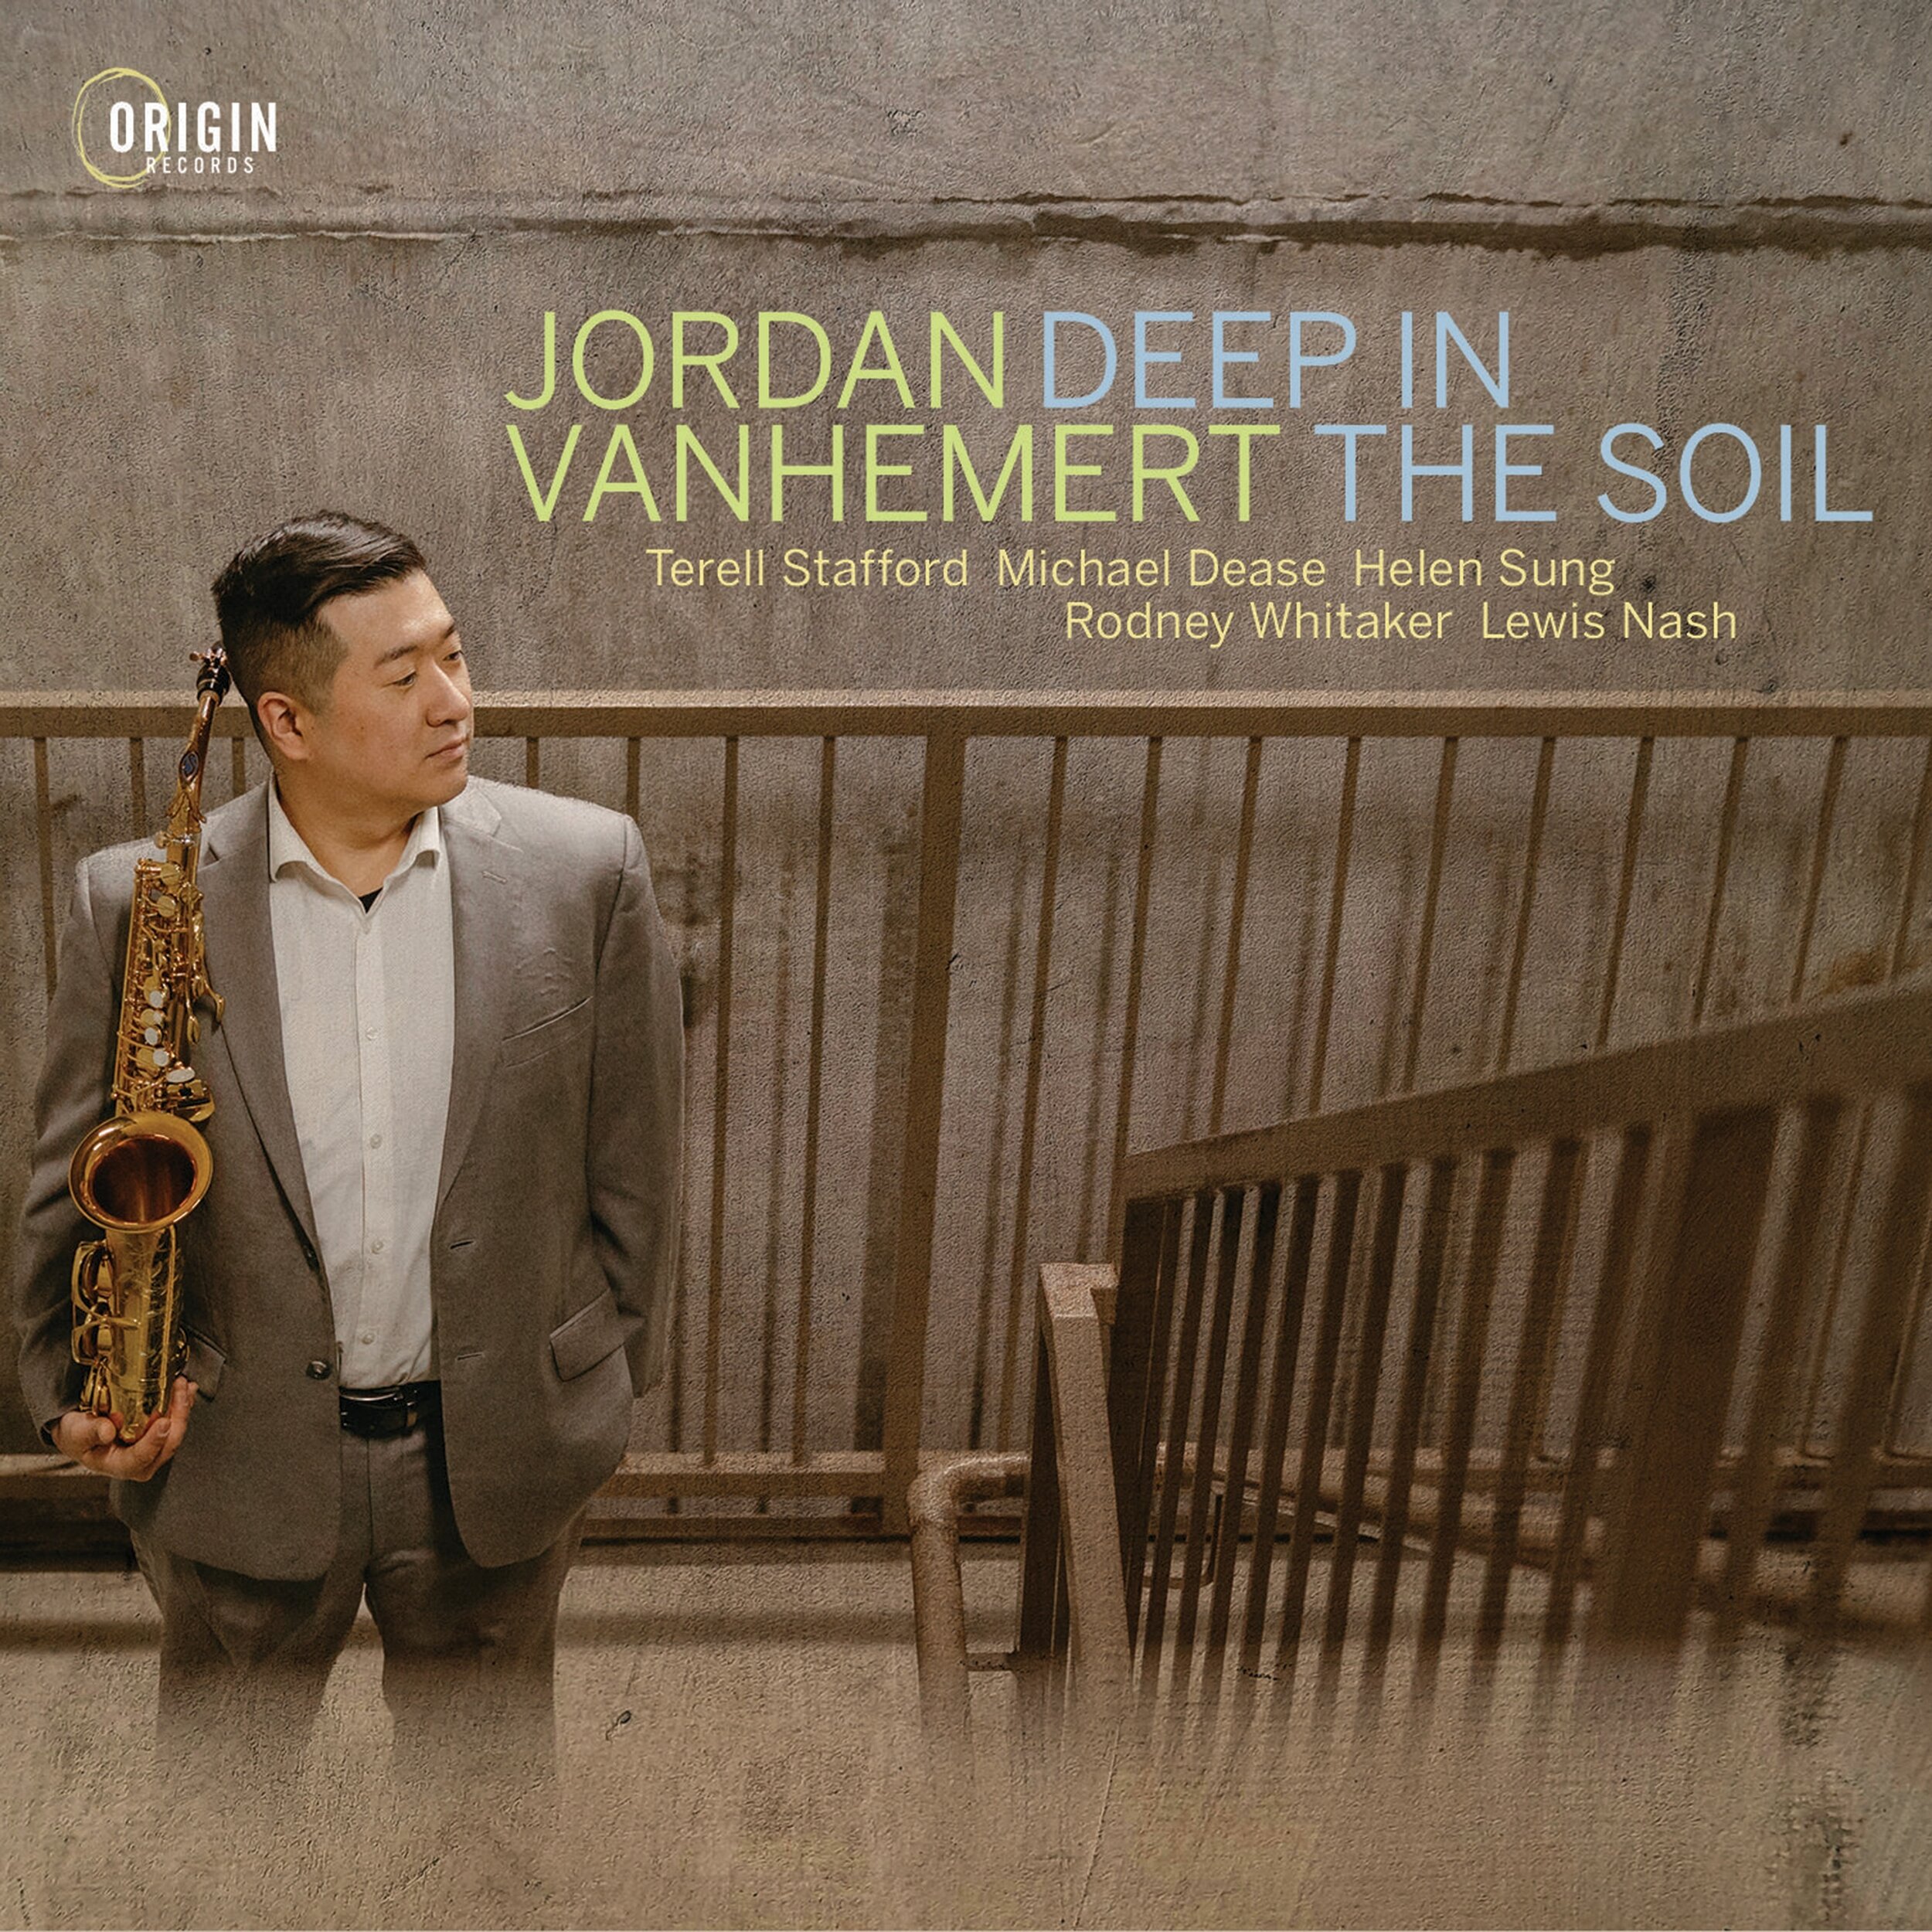 Announcing Deep in the Soil, releasing April 19 on @origin_records. 

This record features music by myself, @deasejazz, @terellstafford, Jimmy Heath, @shah_relle, and more and a return to a first love of sorts: the alto saxophone. Why the alto? Well.